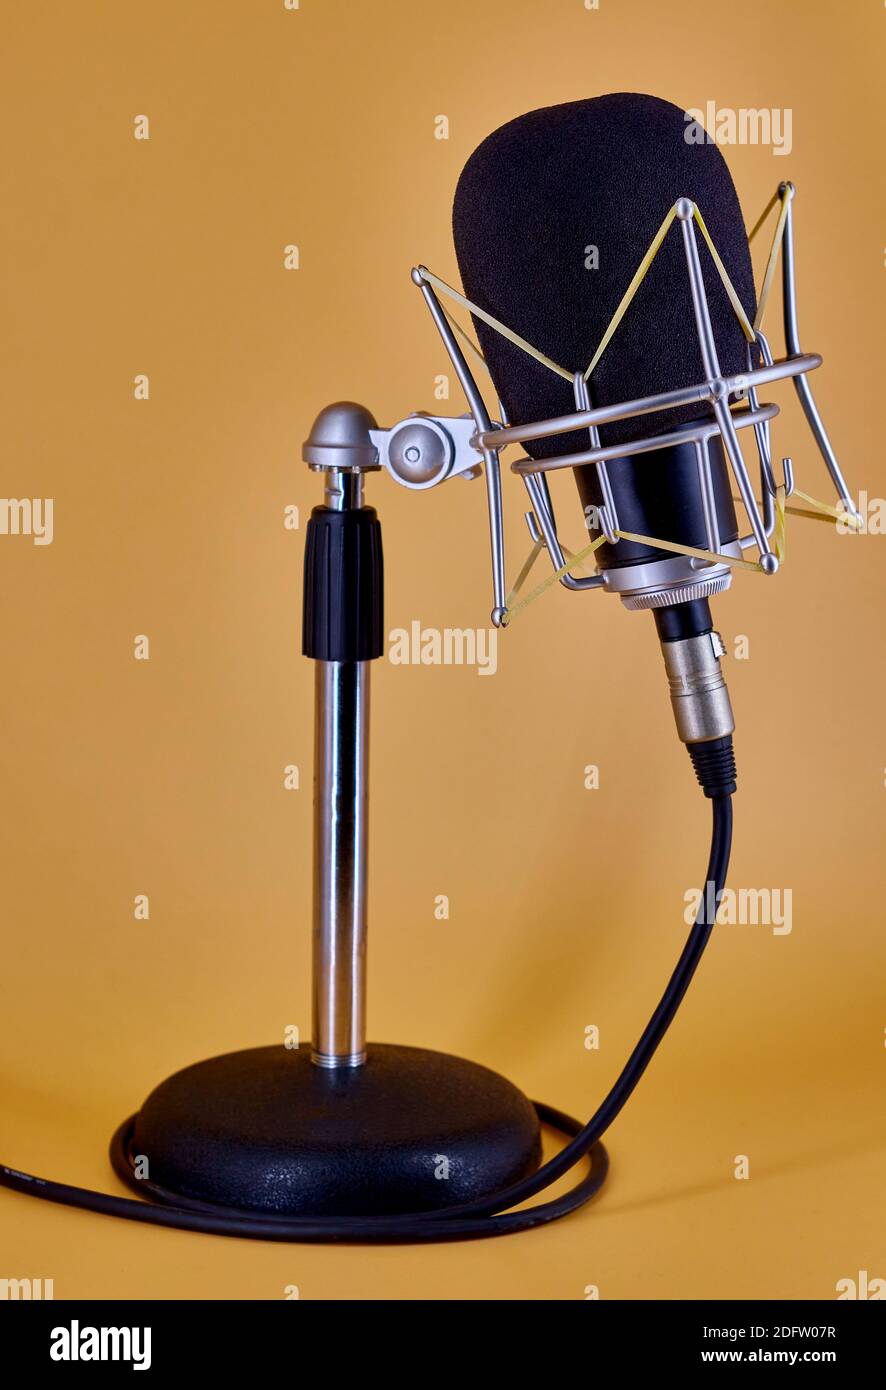 Condenser studio microphone for broadcast communication, on a table stand Stock Photo